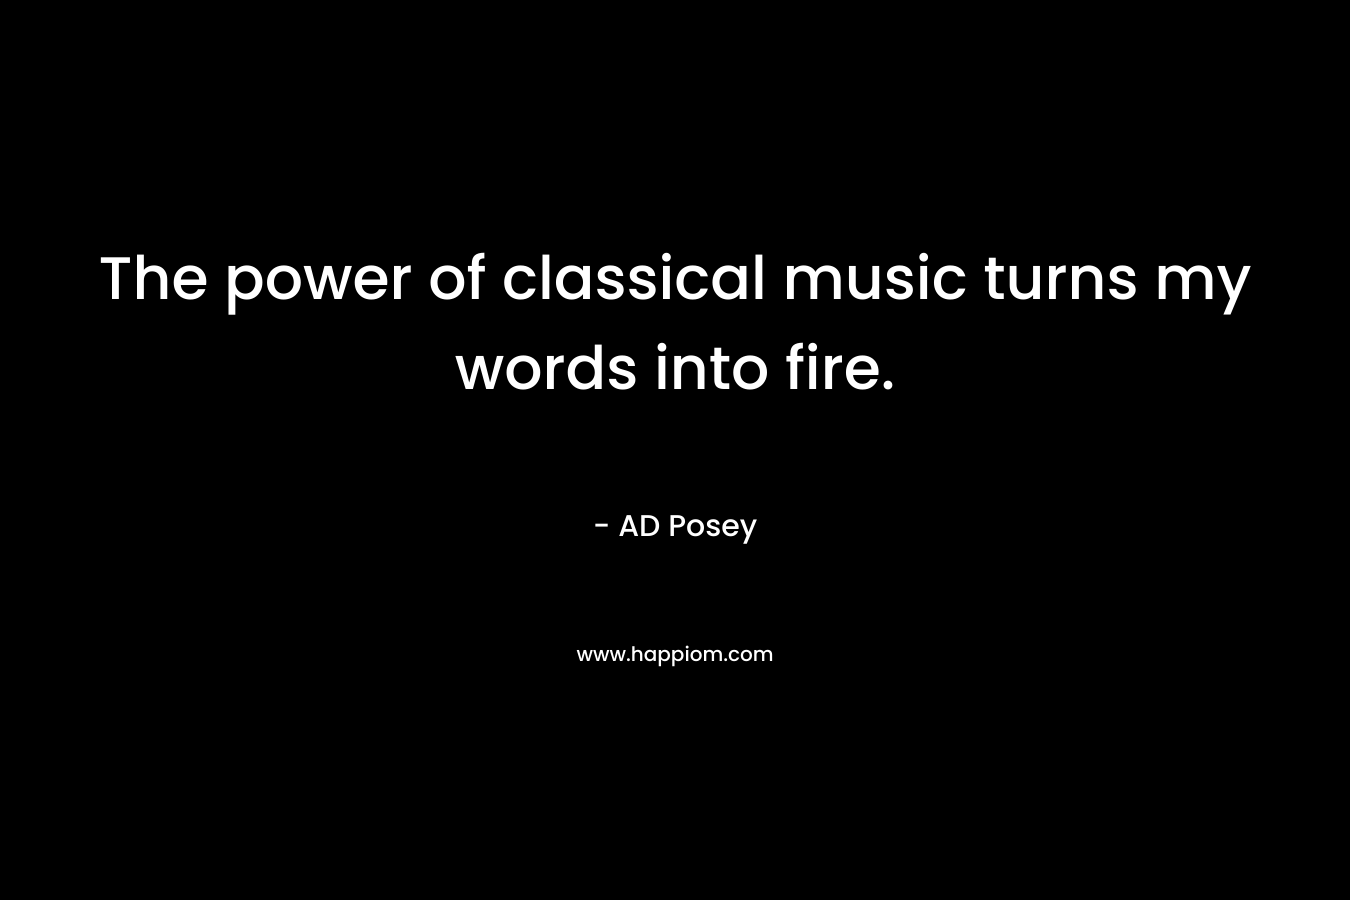 The power of classical music turns my words into fire.